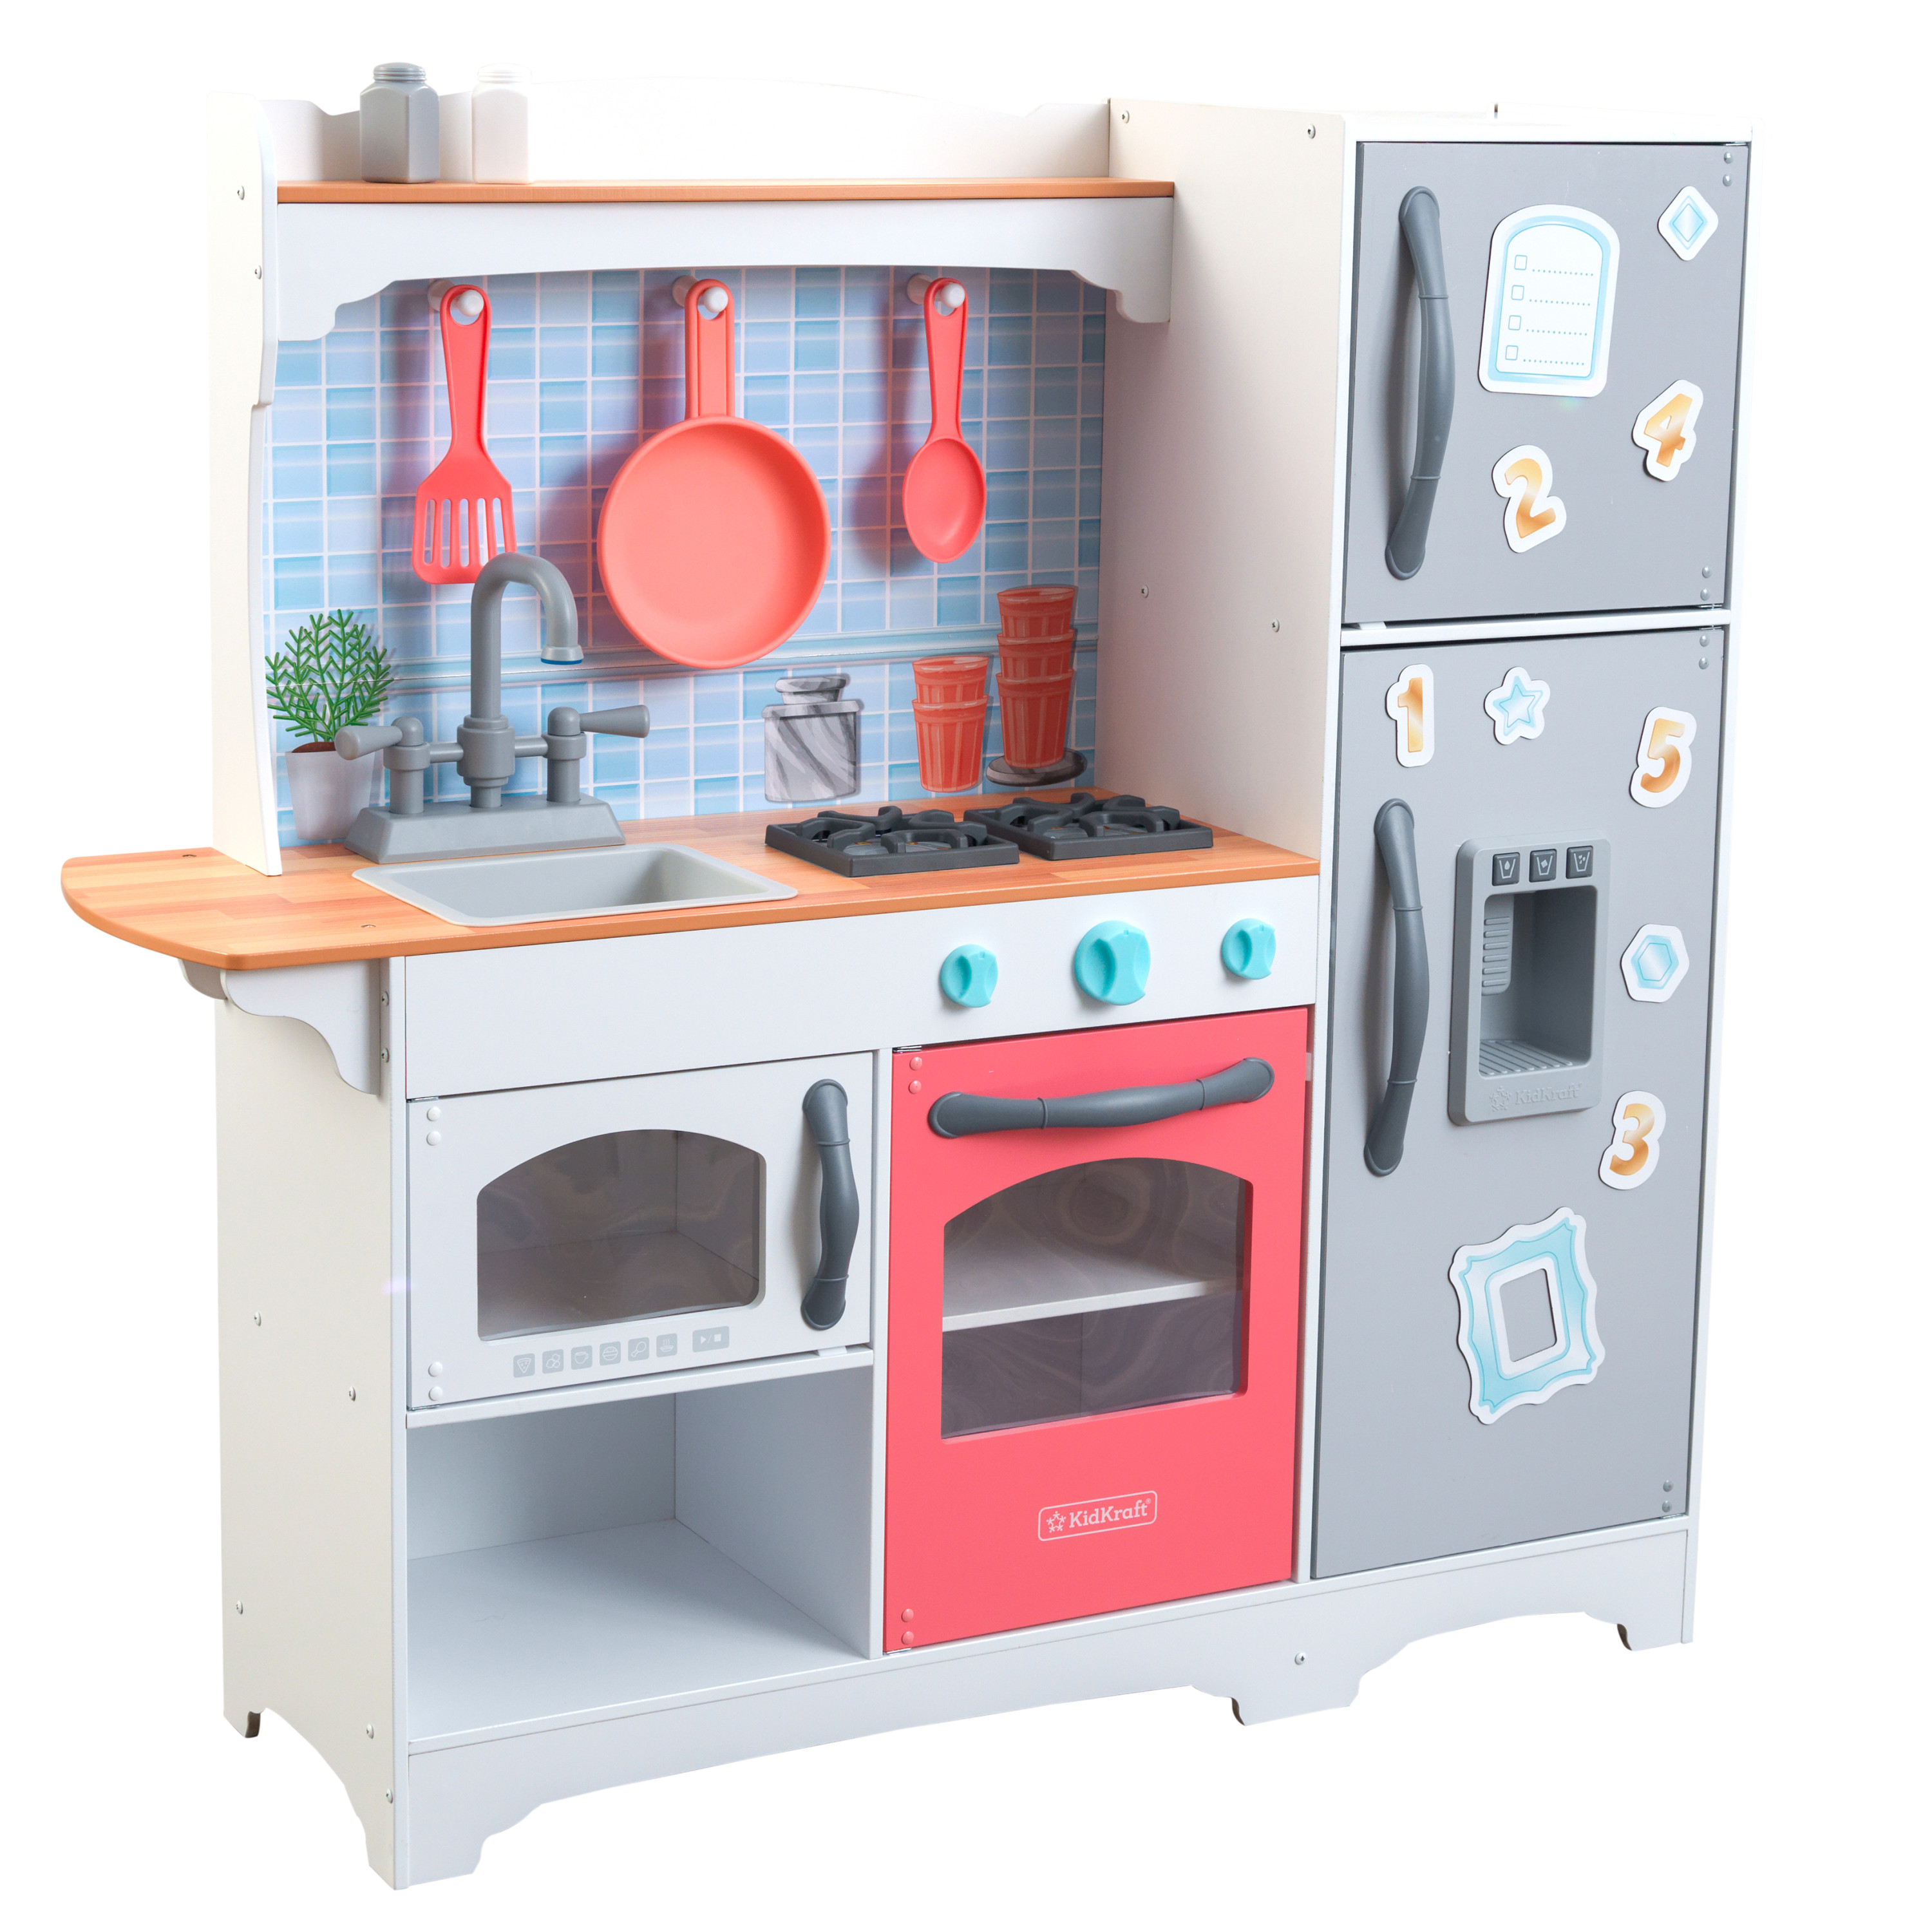 KidKraft Mosaic Magnetic Play Kitchen for Kids, Gray and Pink - image 5 of 12